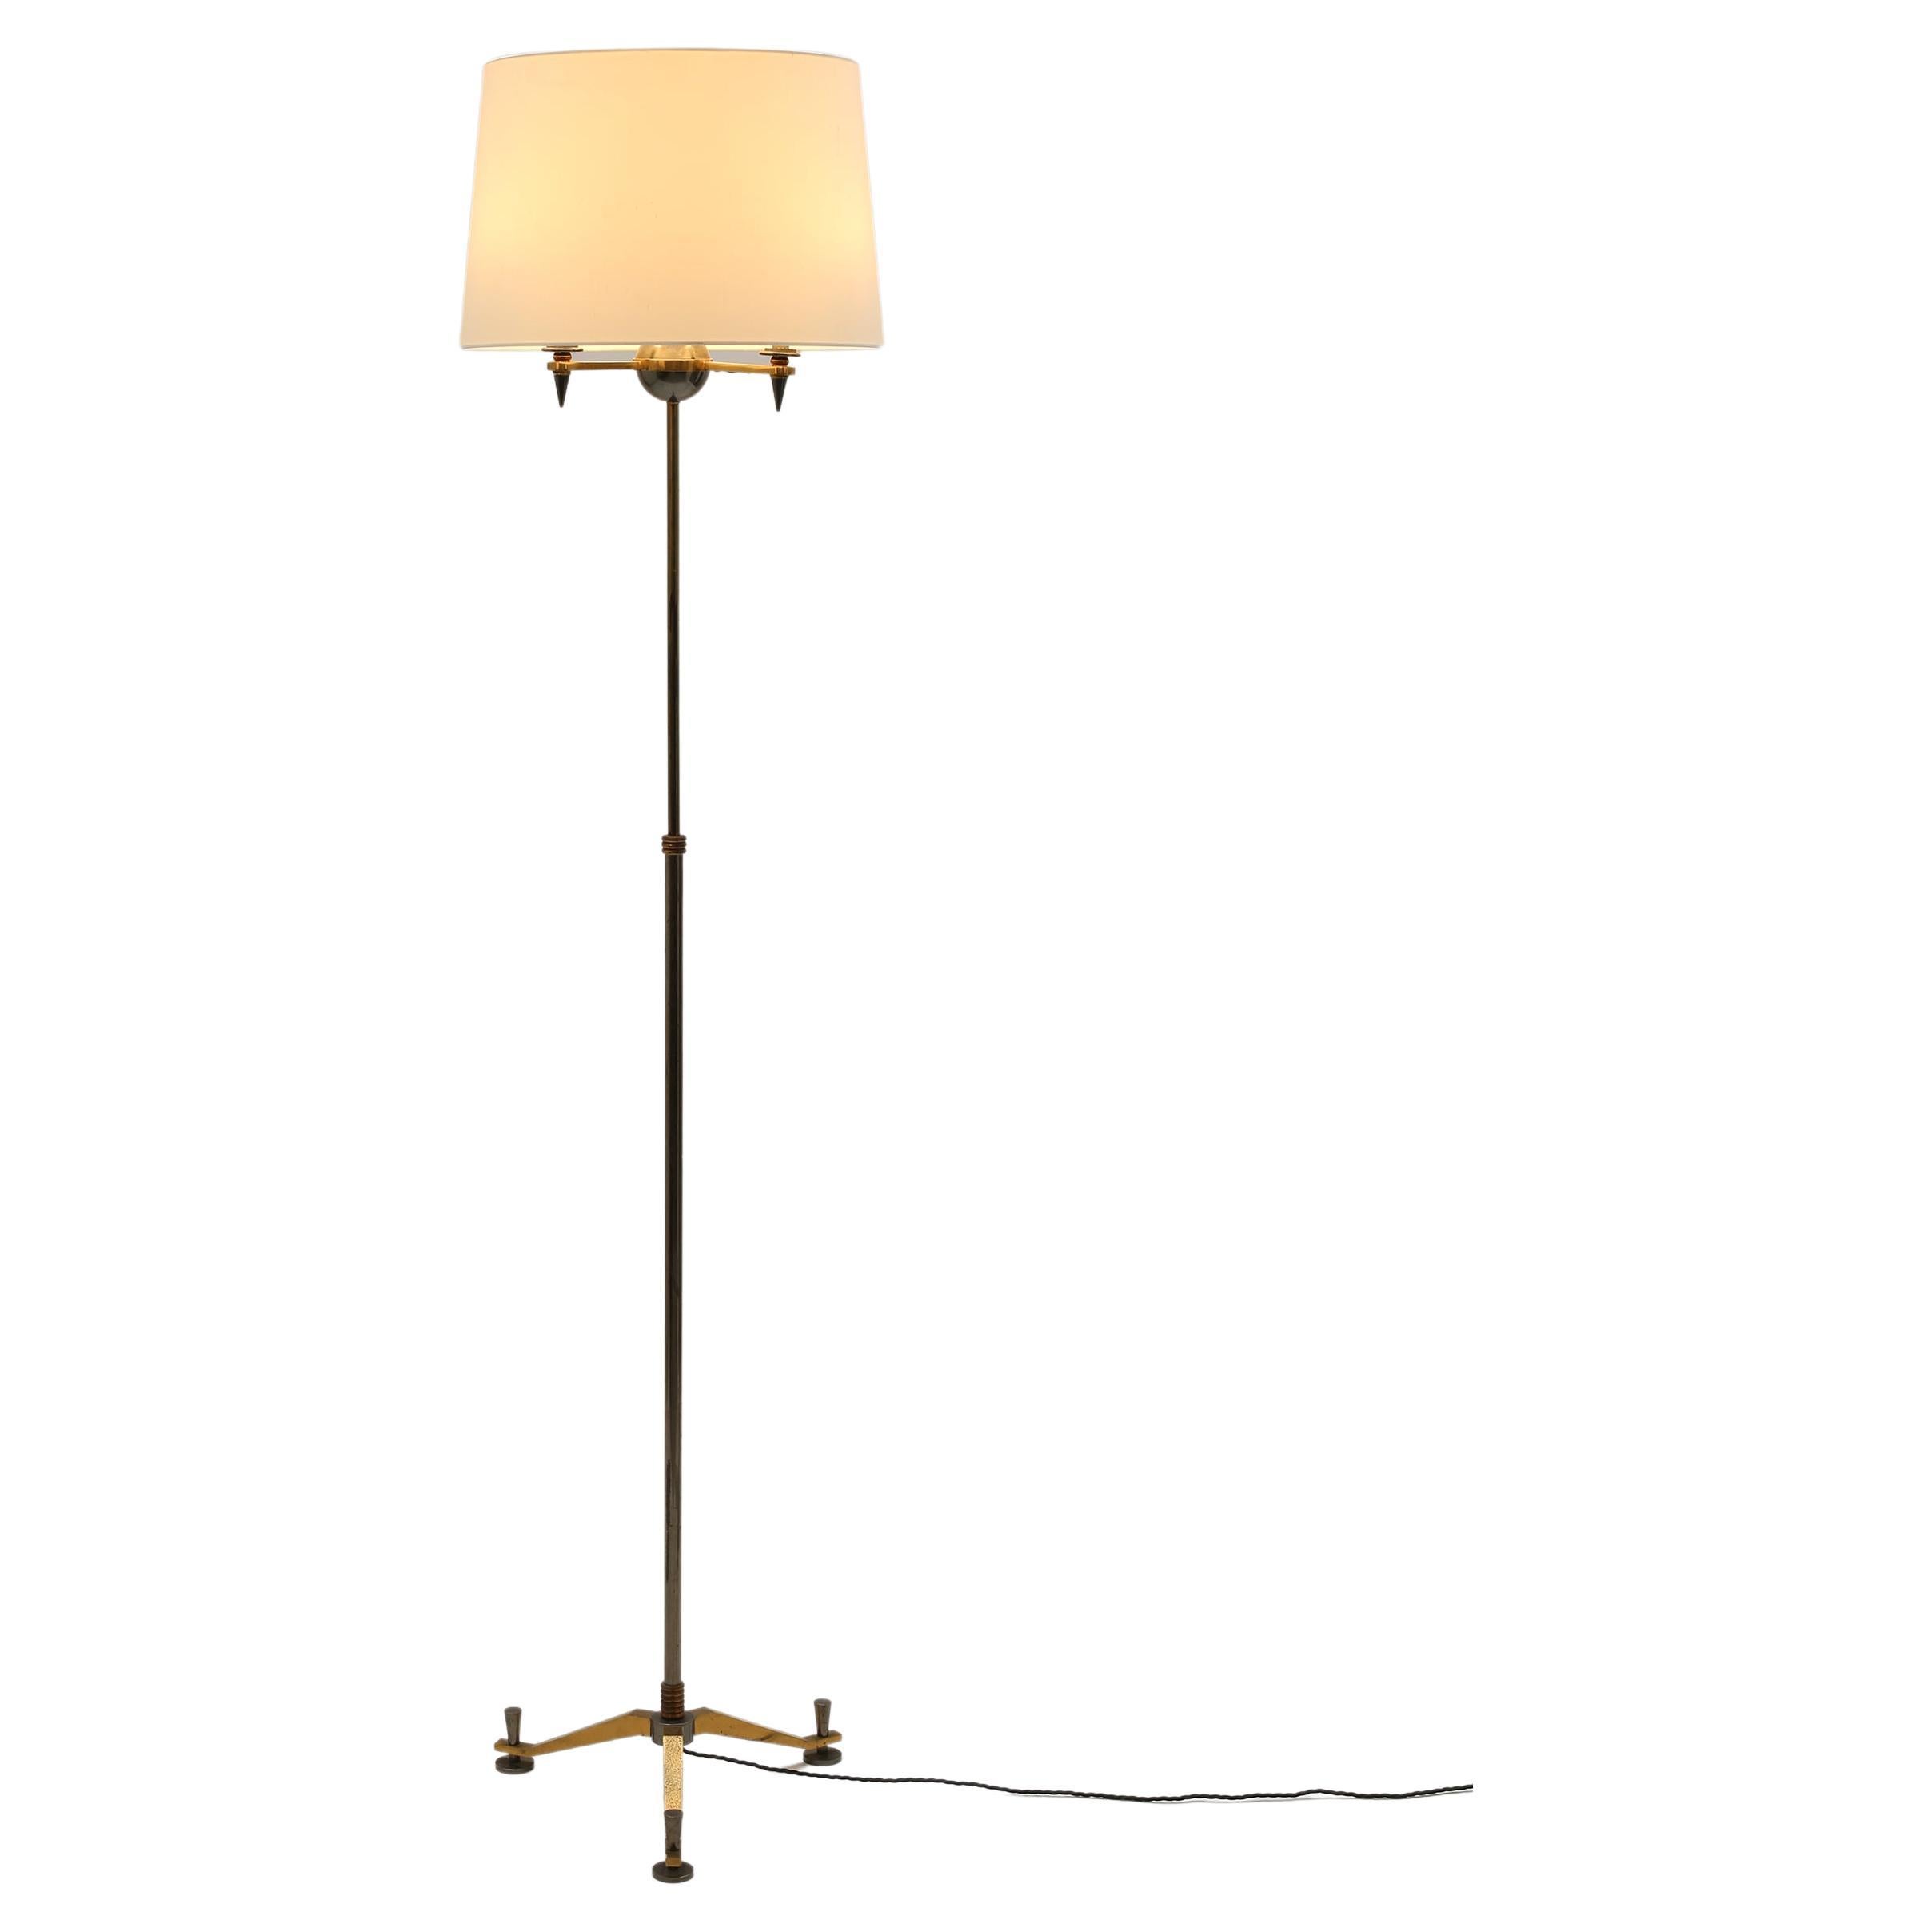 Neoclassical Floor Lamp by Henri Petitot for Atelier Petitot, French, c. 1930s For Sale